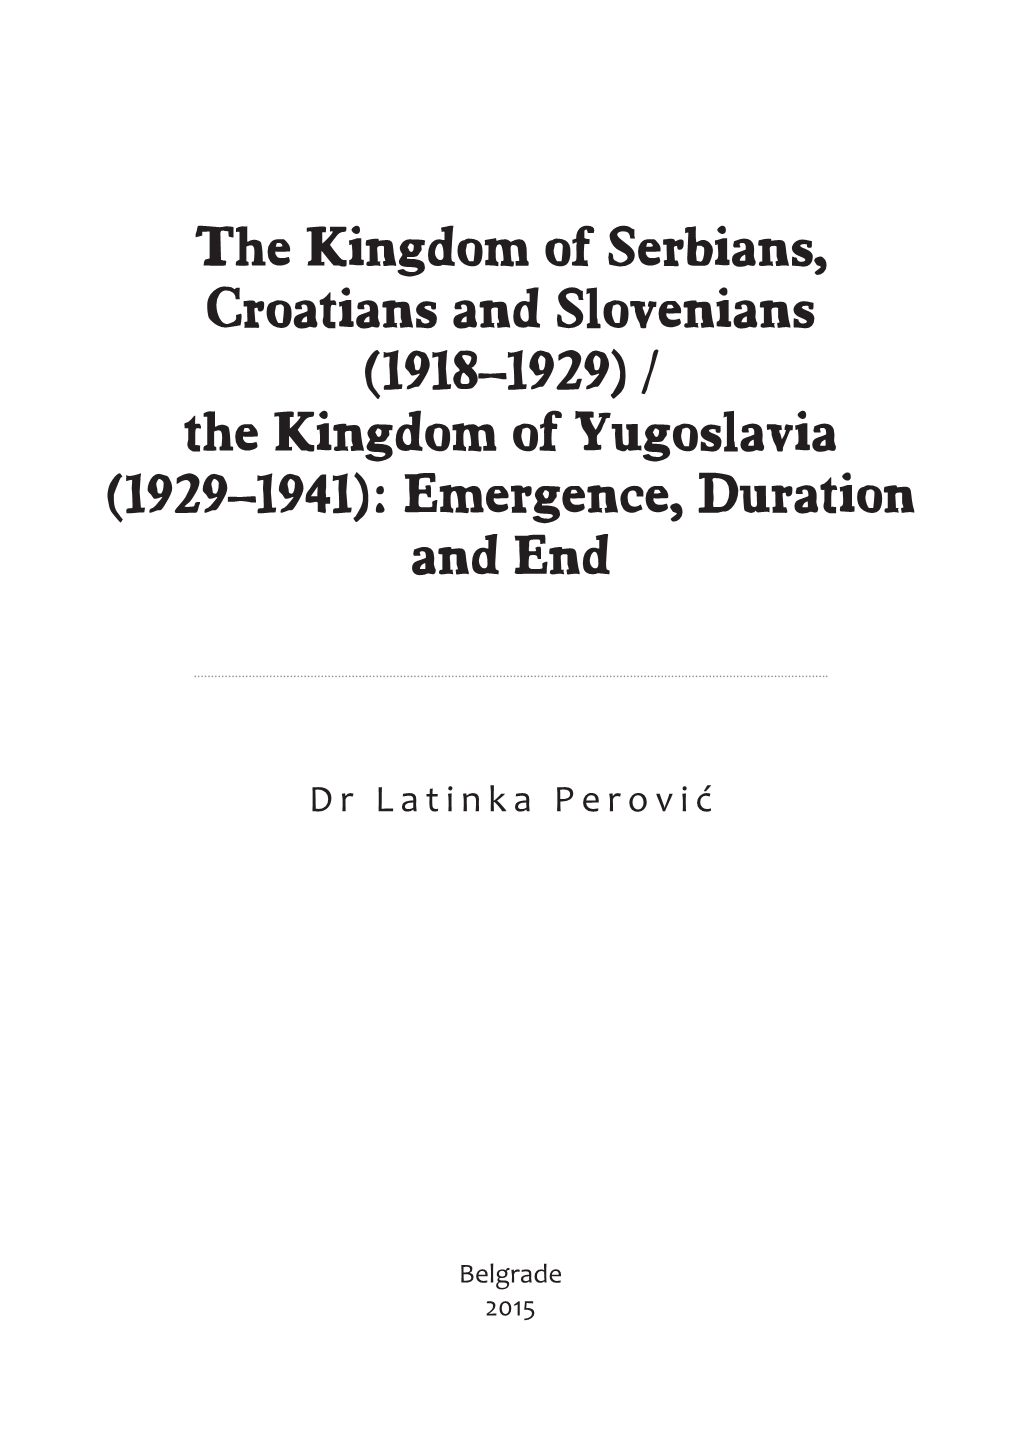 The Kingdom of Serbians, Croatians and Slovenians (1918–1929) / the Kingdom of Yugoslavia (1929–1941): Emergence, Duration and End